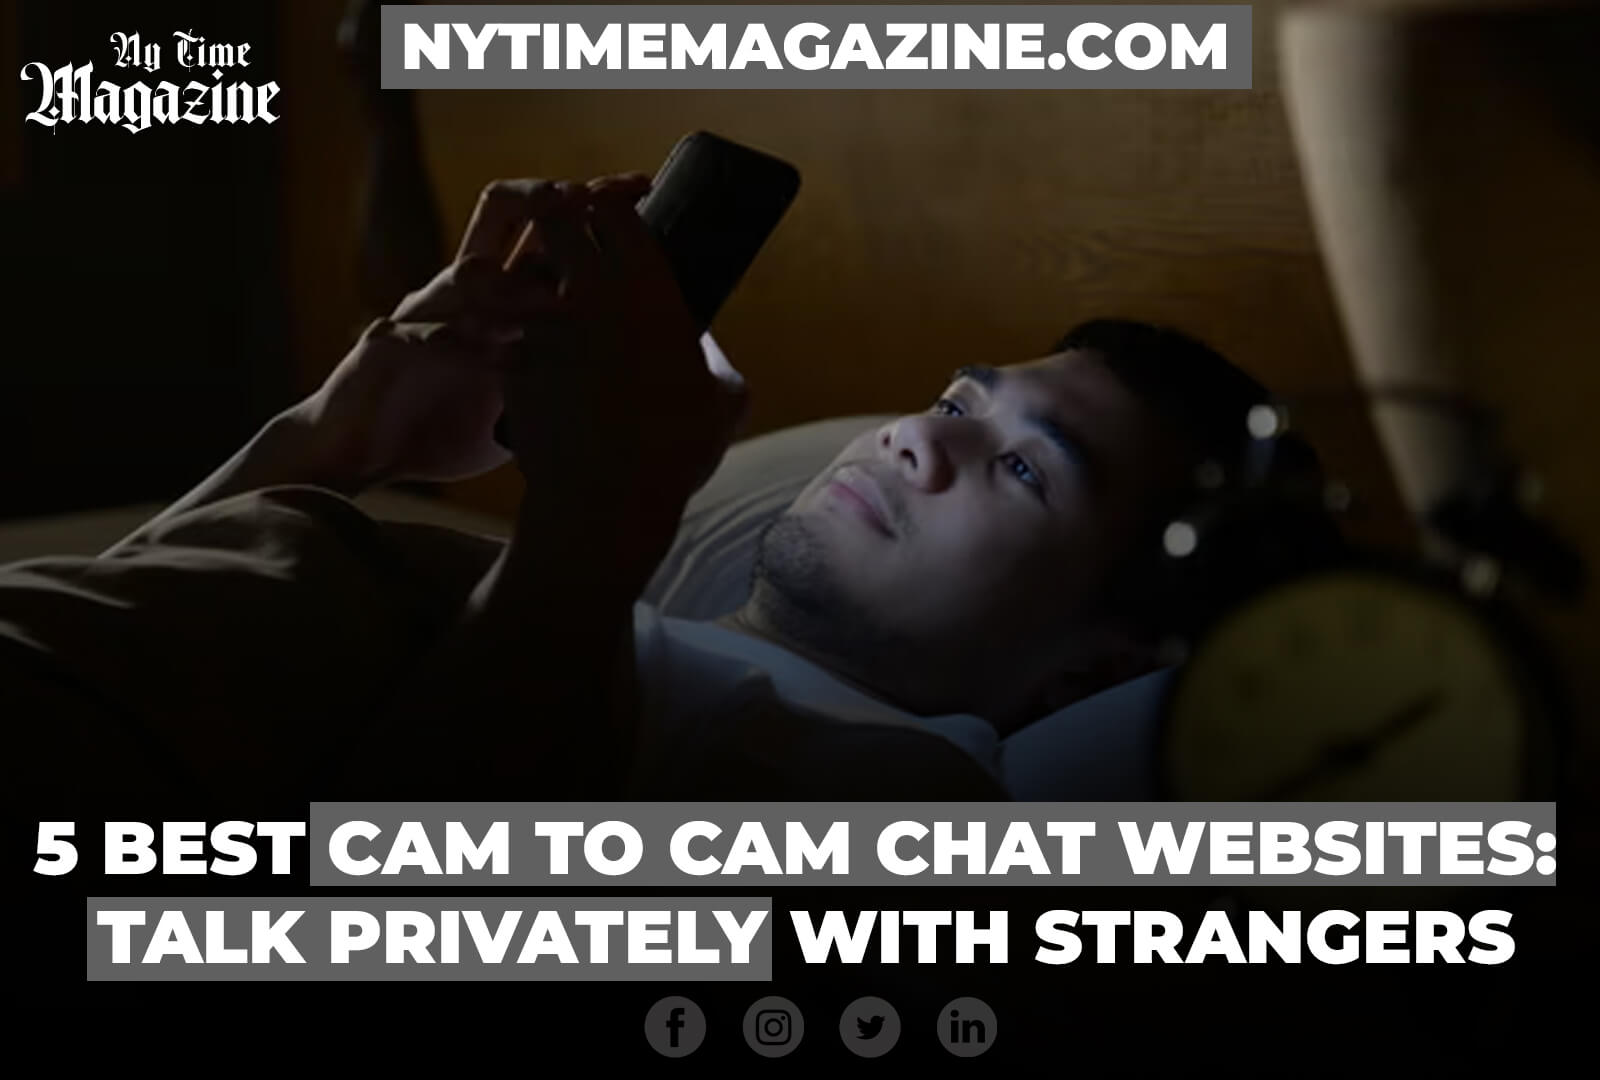 5 BEST CAM-TO-CAM CHAT WEBSITES TALK PRIVATELY WITH STRANGERS